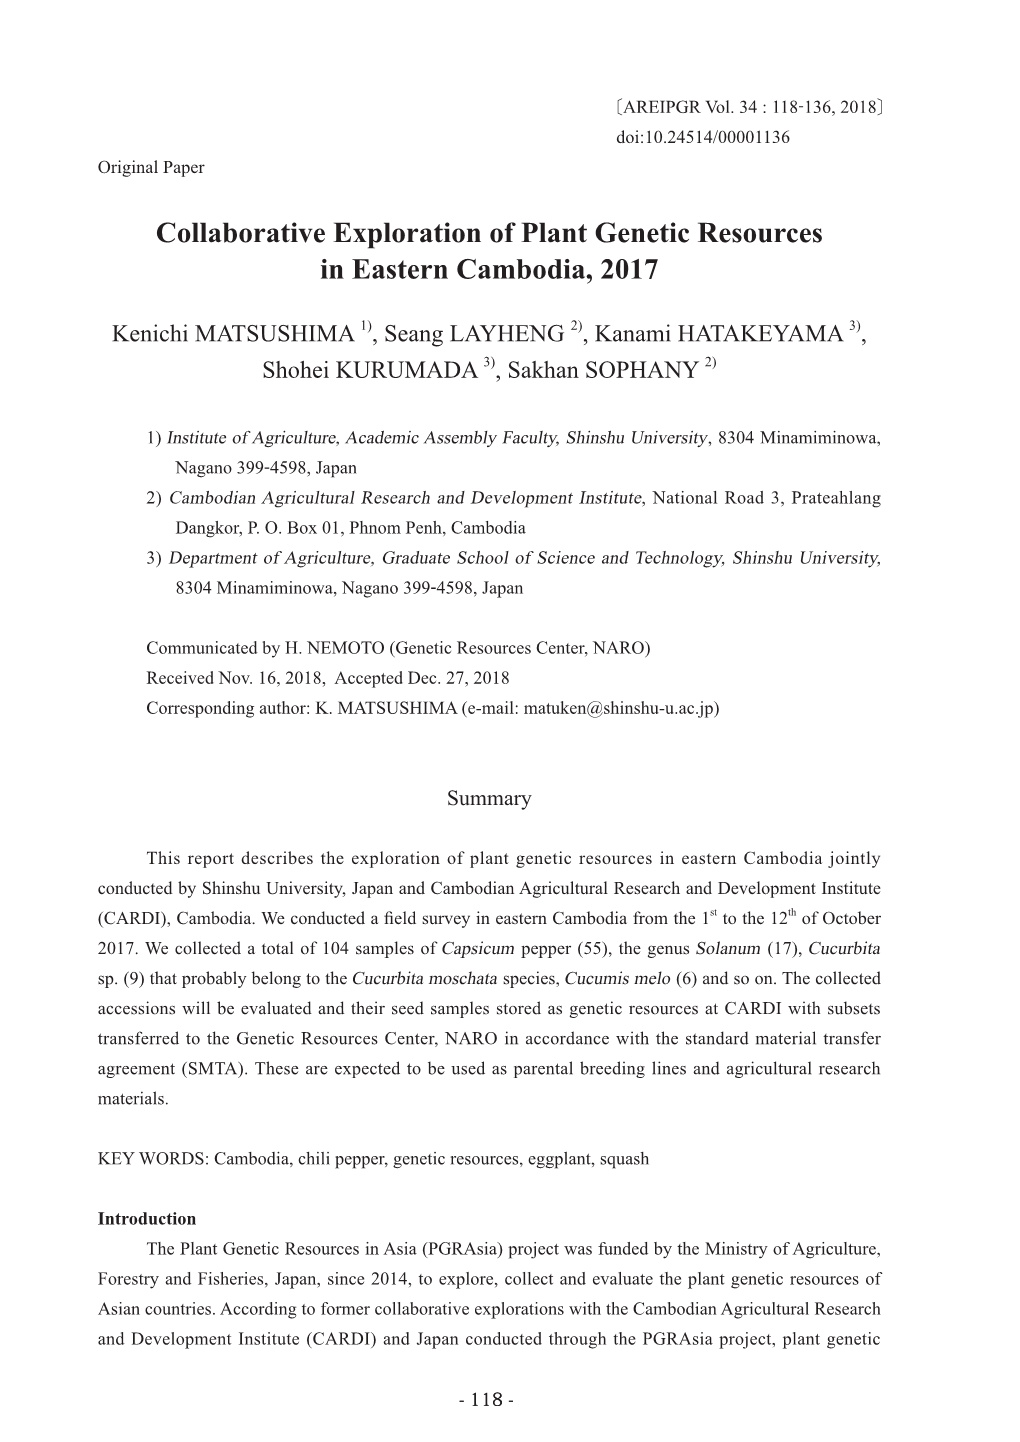 Collaborative Exploration of Plant Genetic Resources in Eastern Cambodia, 2017